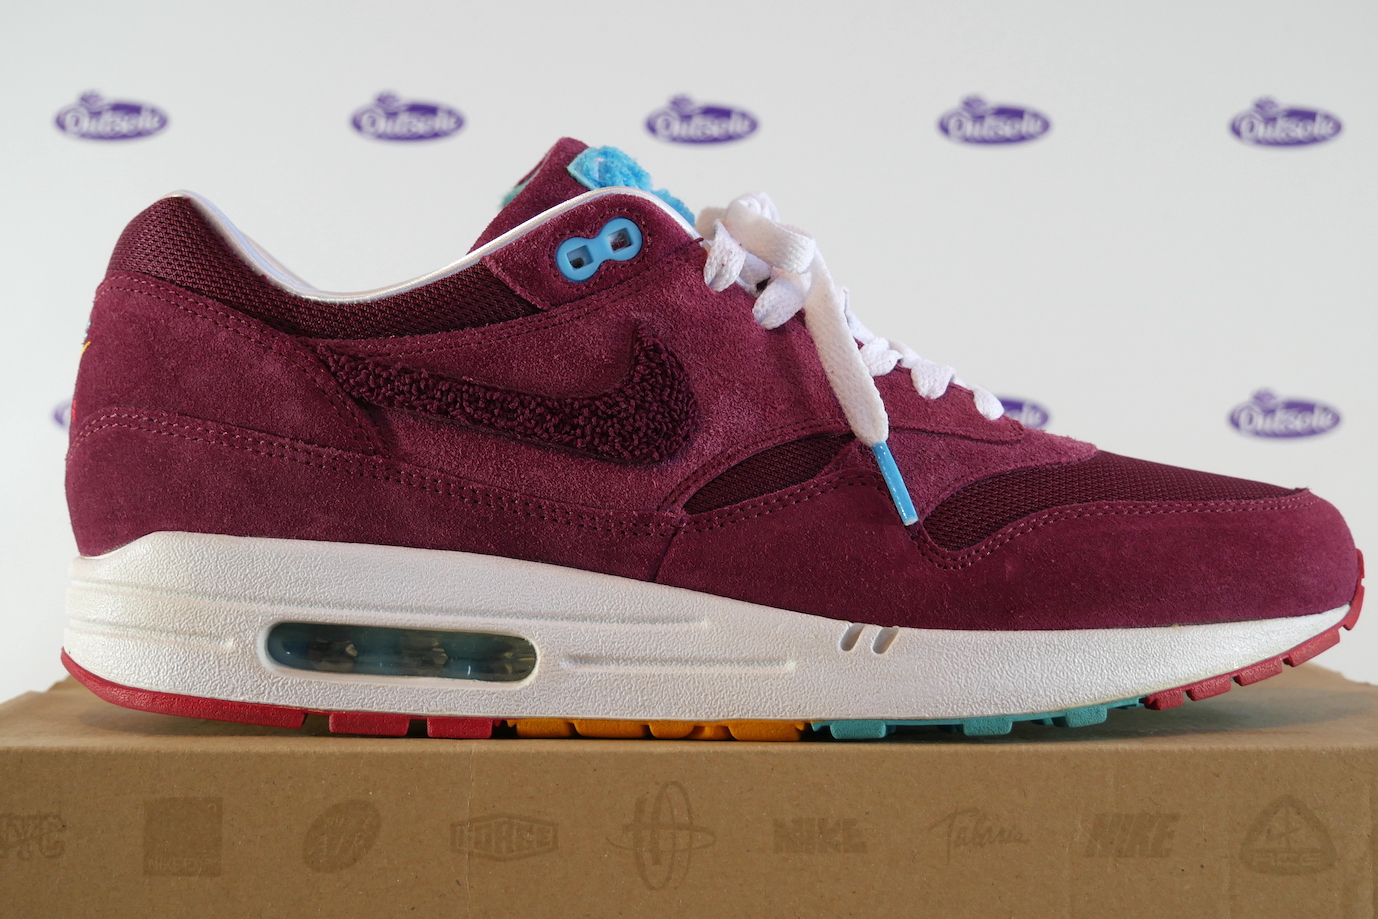 Nike Air Max 1 Patta Parra Cherrywood • ✓ In stock at Outsole